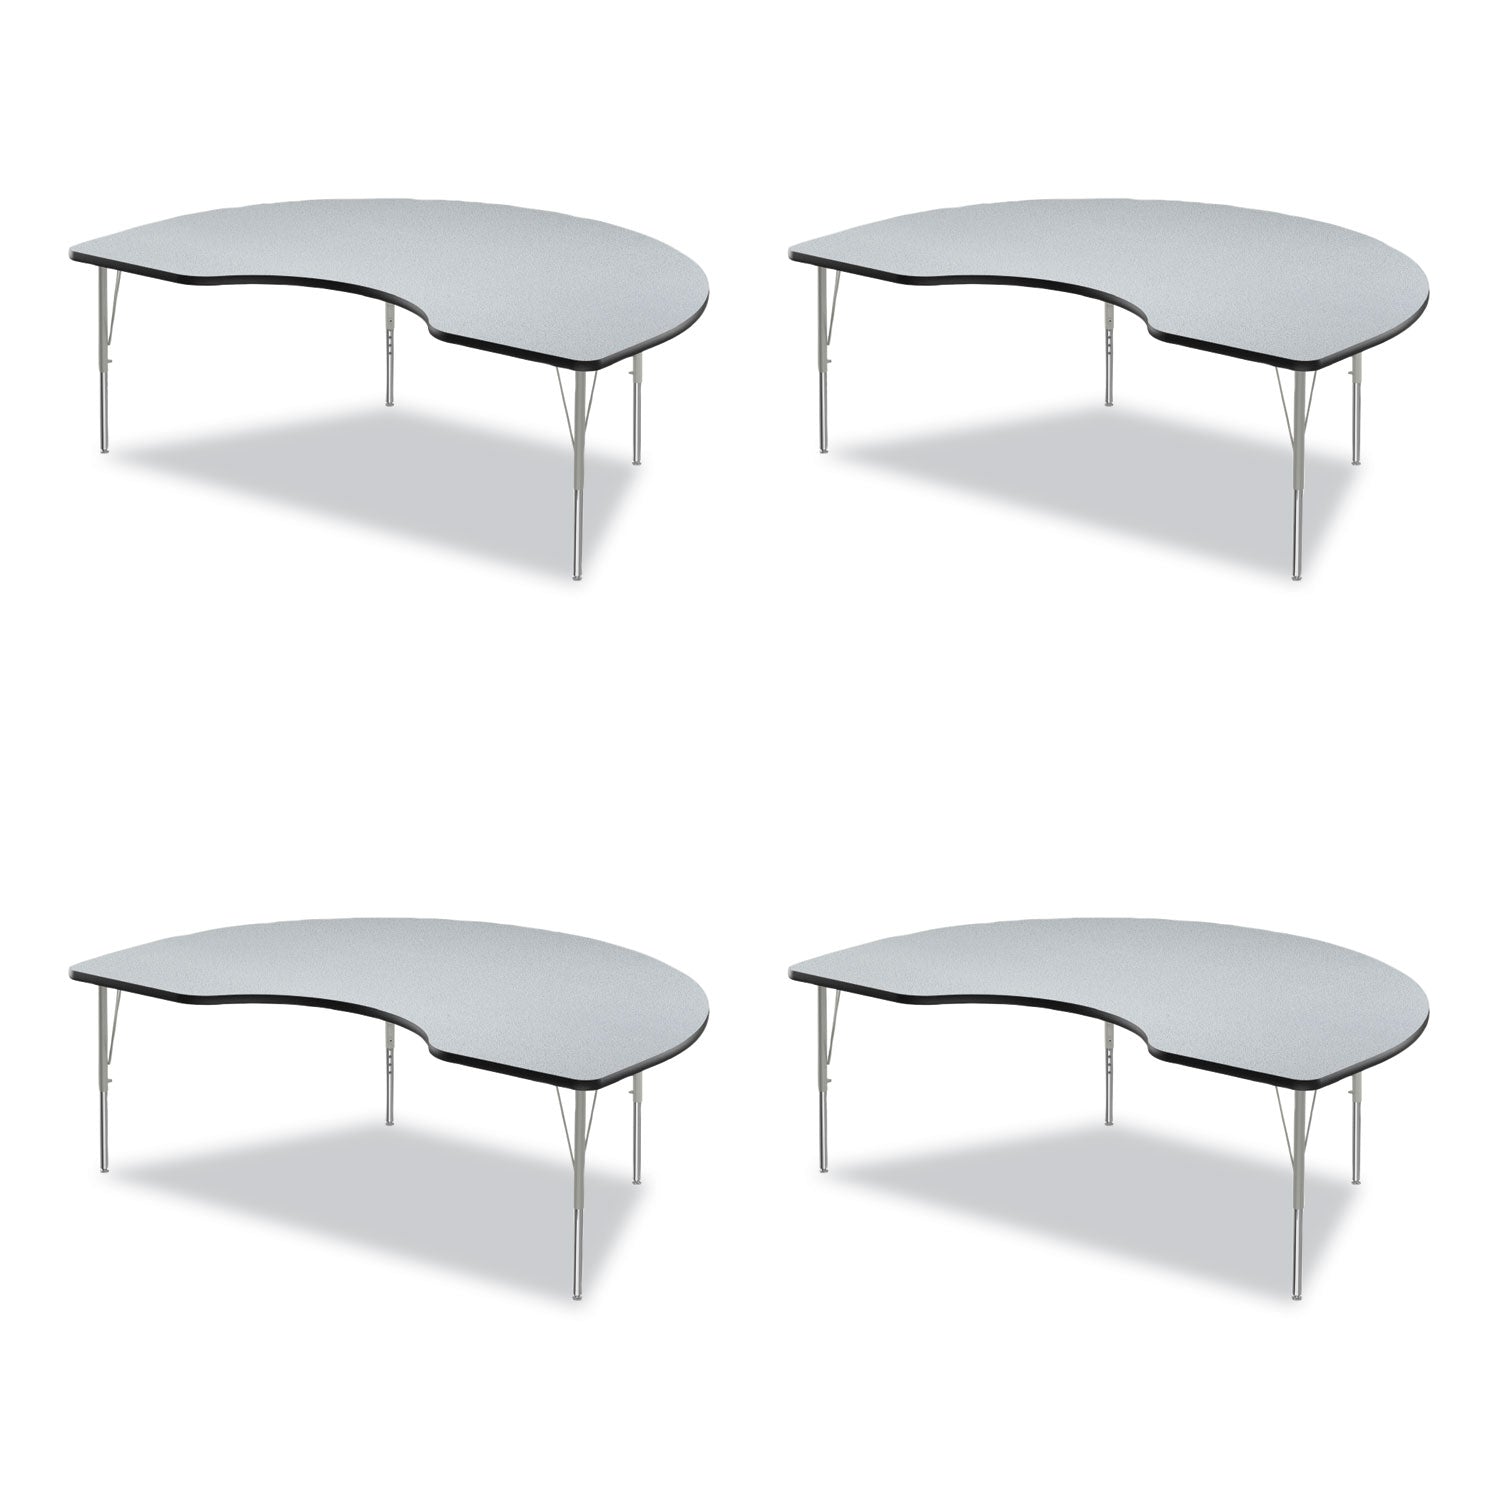 adjustable-activity-tables-kidney-shaped-72-x-48-x-19-to-29-gray-top-black-legs-4-pallet-ships-in-4-6-business-days_crl4872tf1595k4 - 1